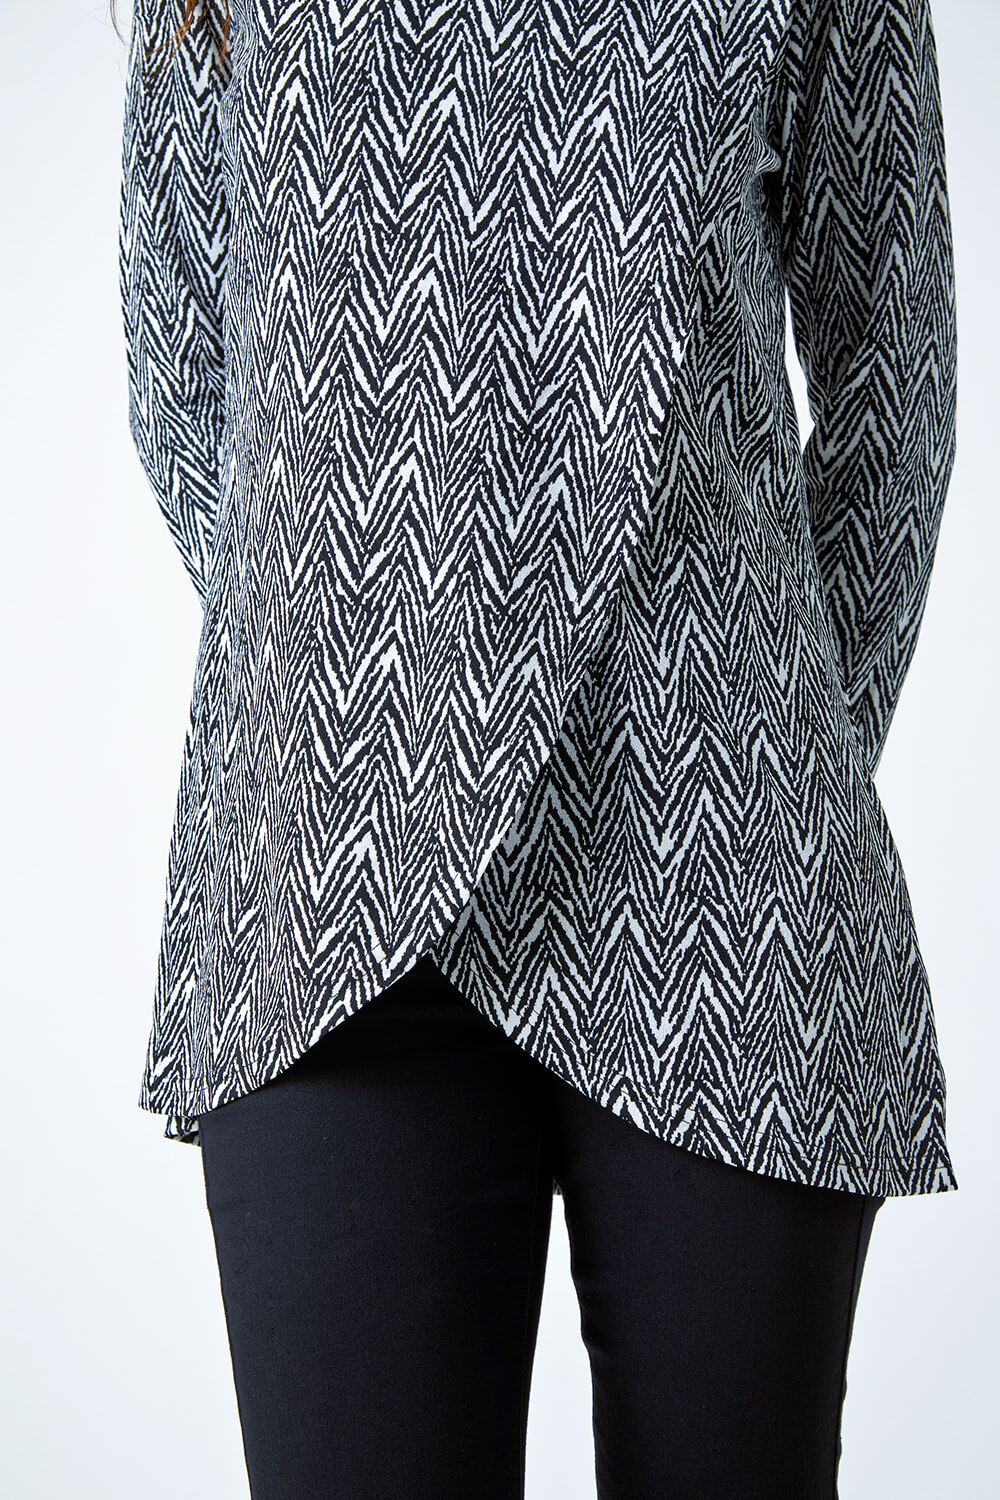 Black Geo Print Wrap Front Cowl Neck Stretch Top, Image 5 of 5